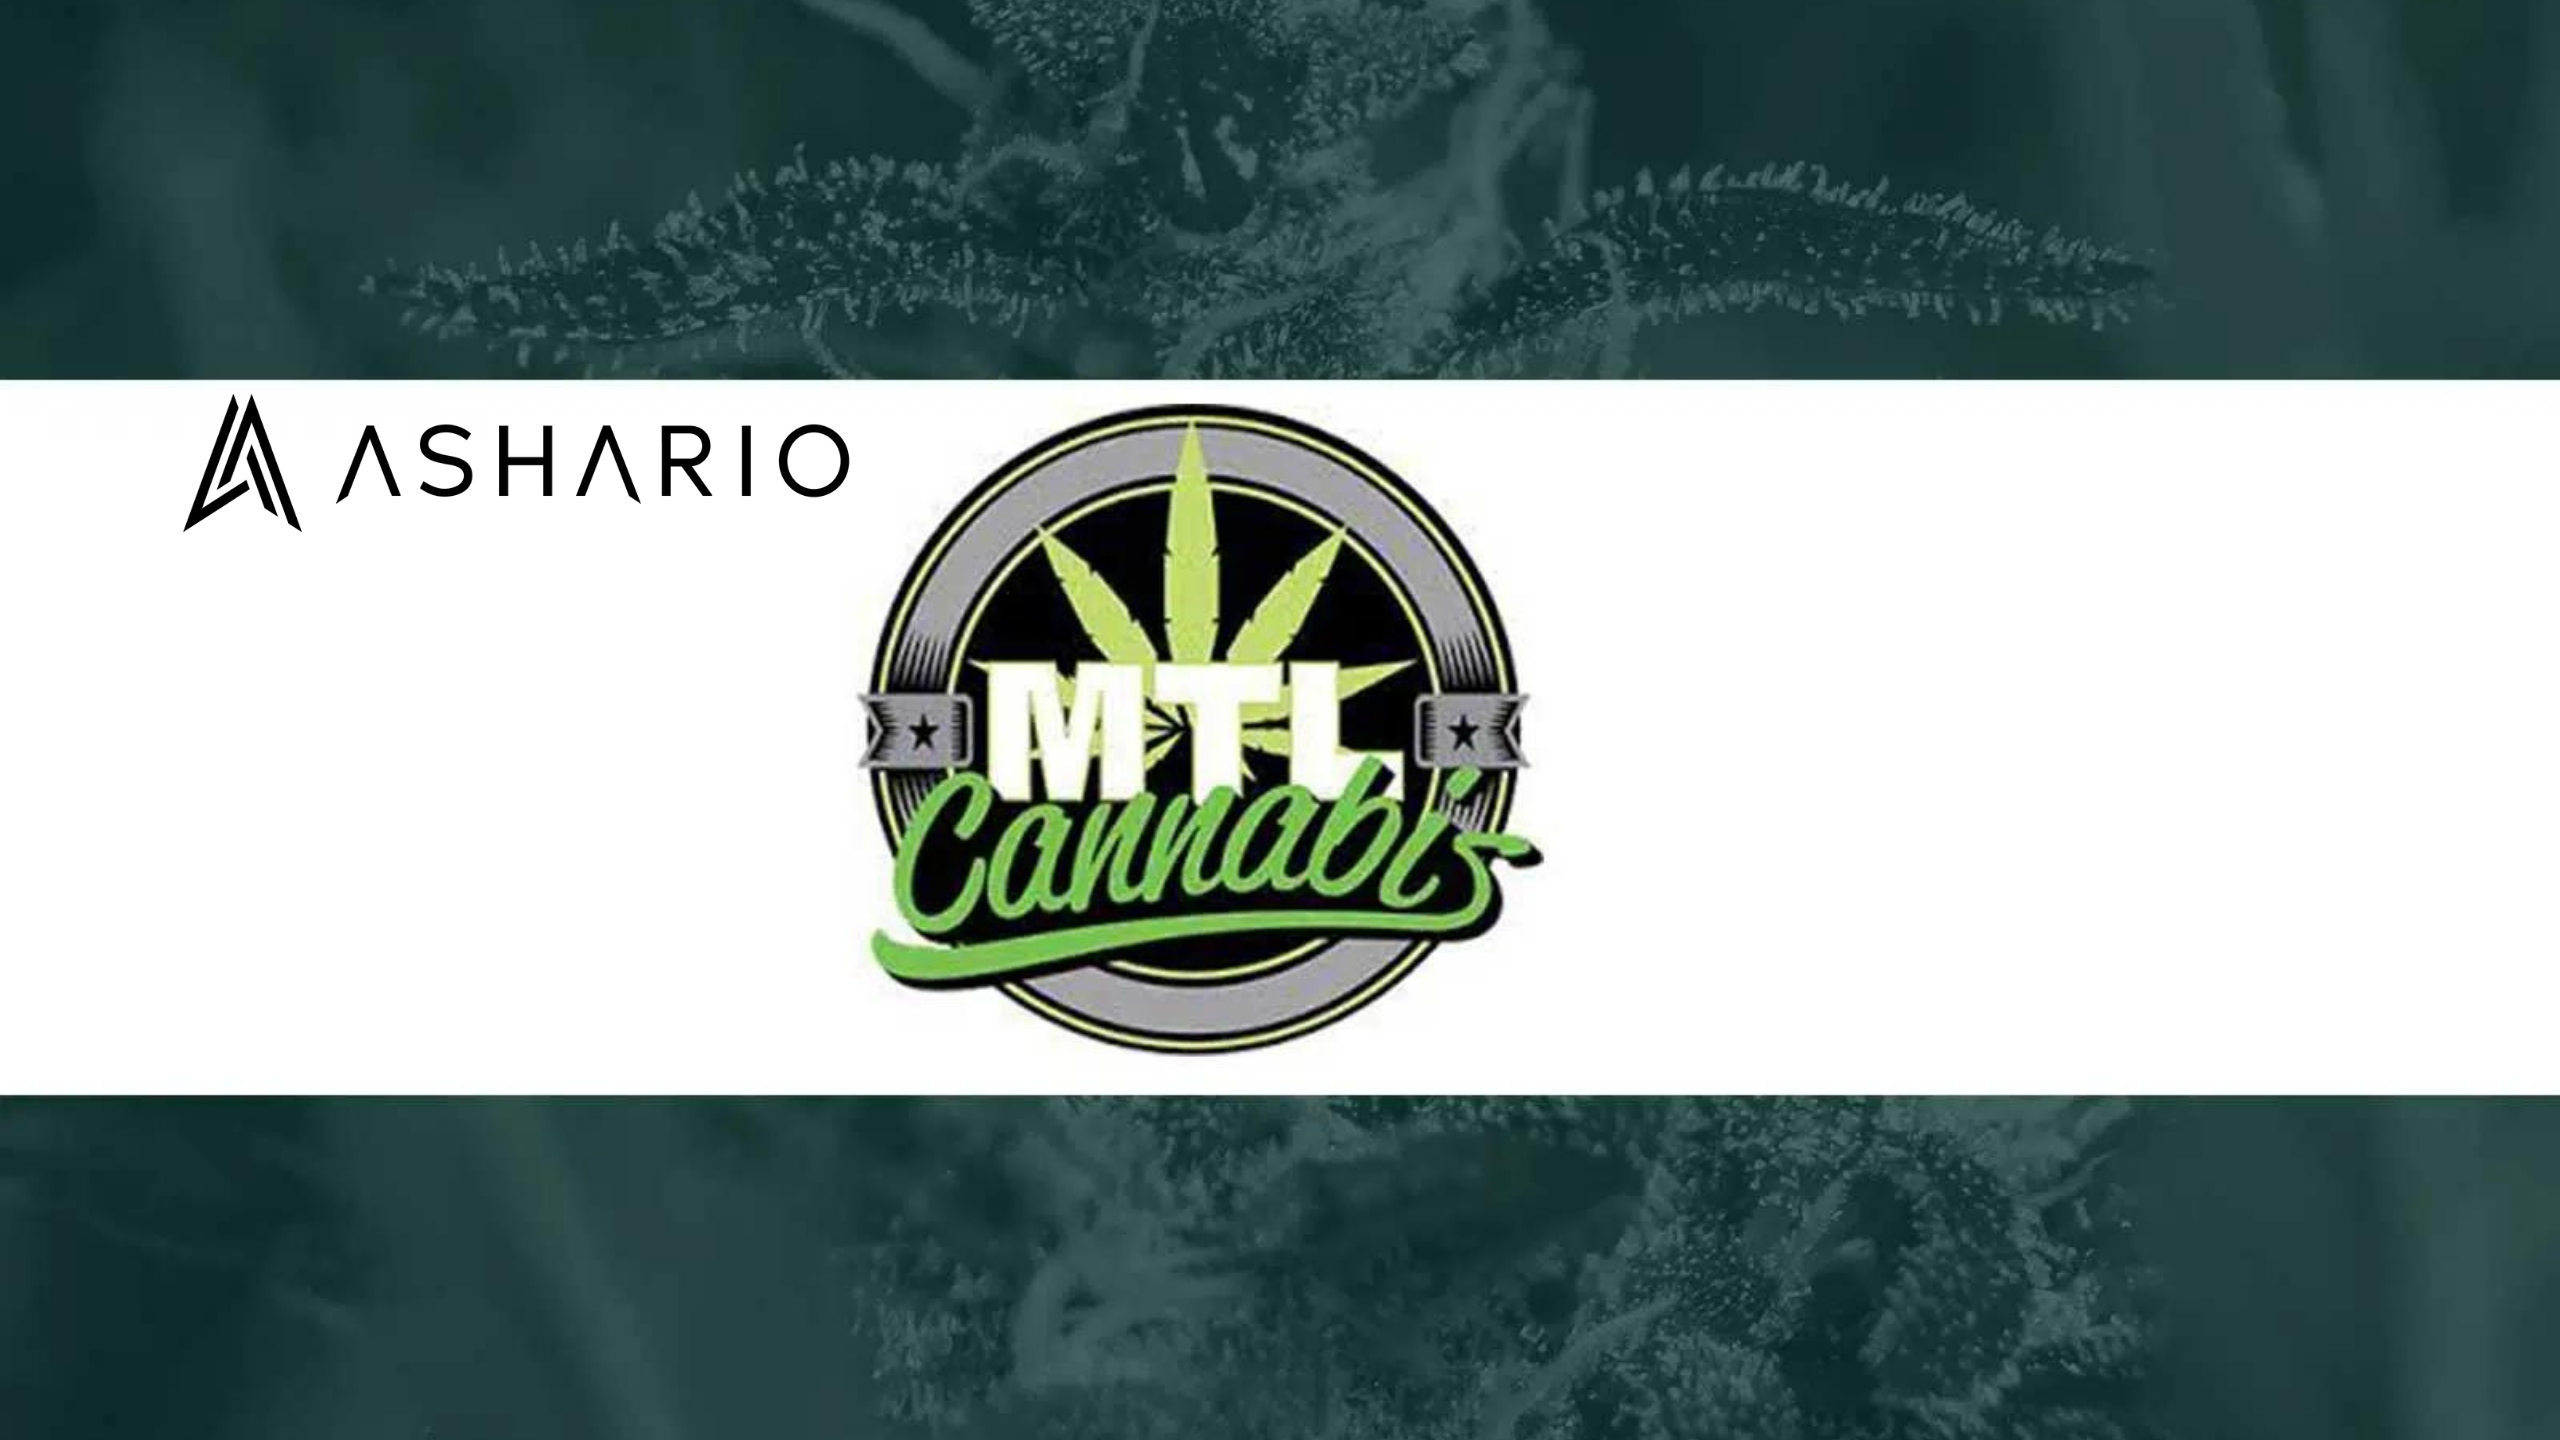 Discover high-THC cannabis strains at Ashario in Montreal. Explore potent options like Sage N' Sour Sativa and Jungl' Cake Hybrid.